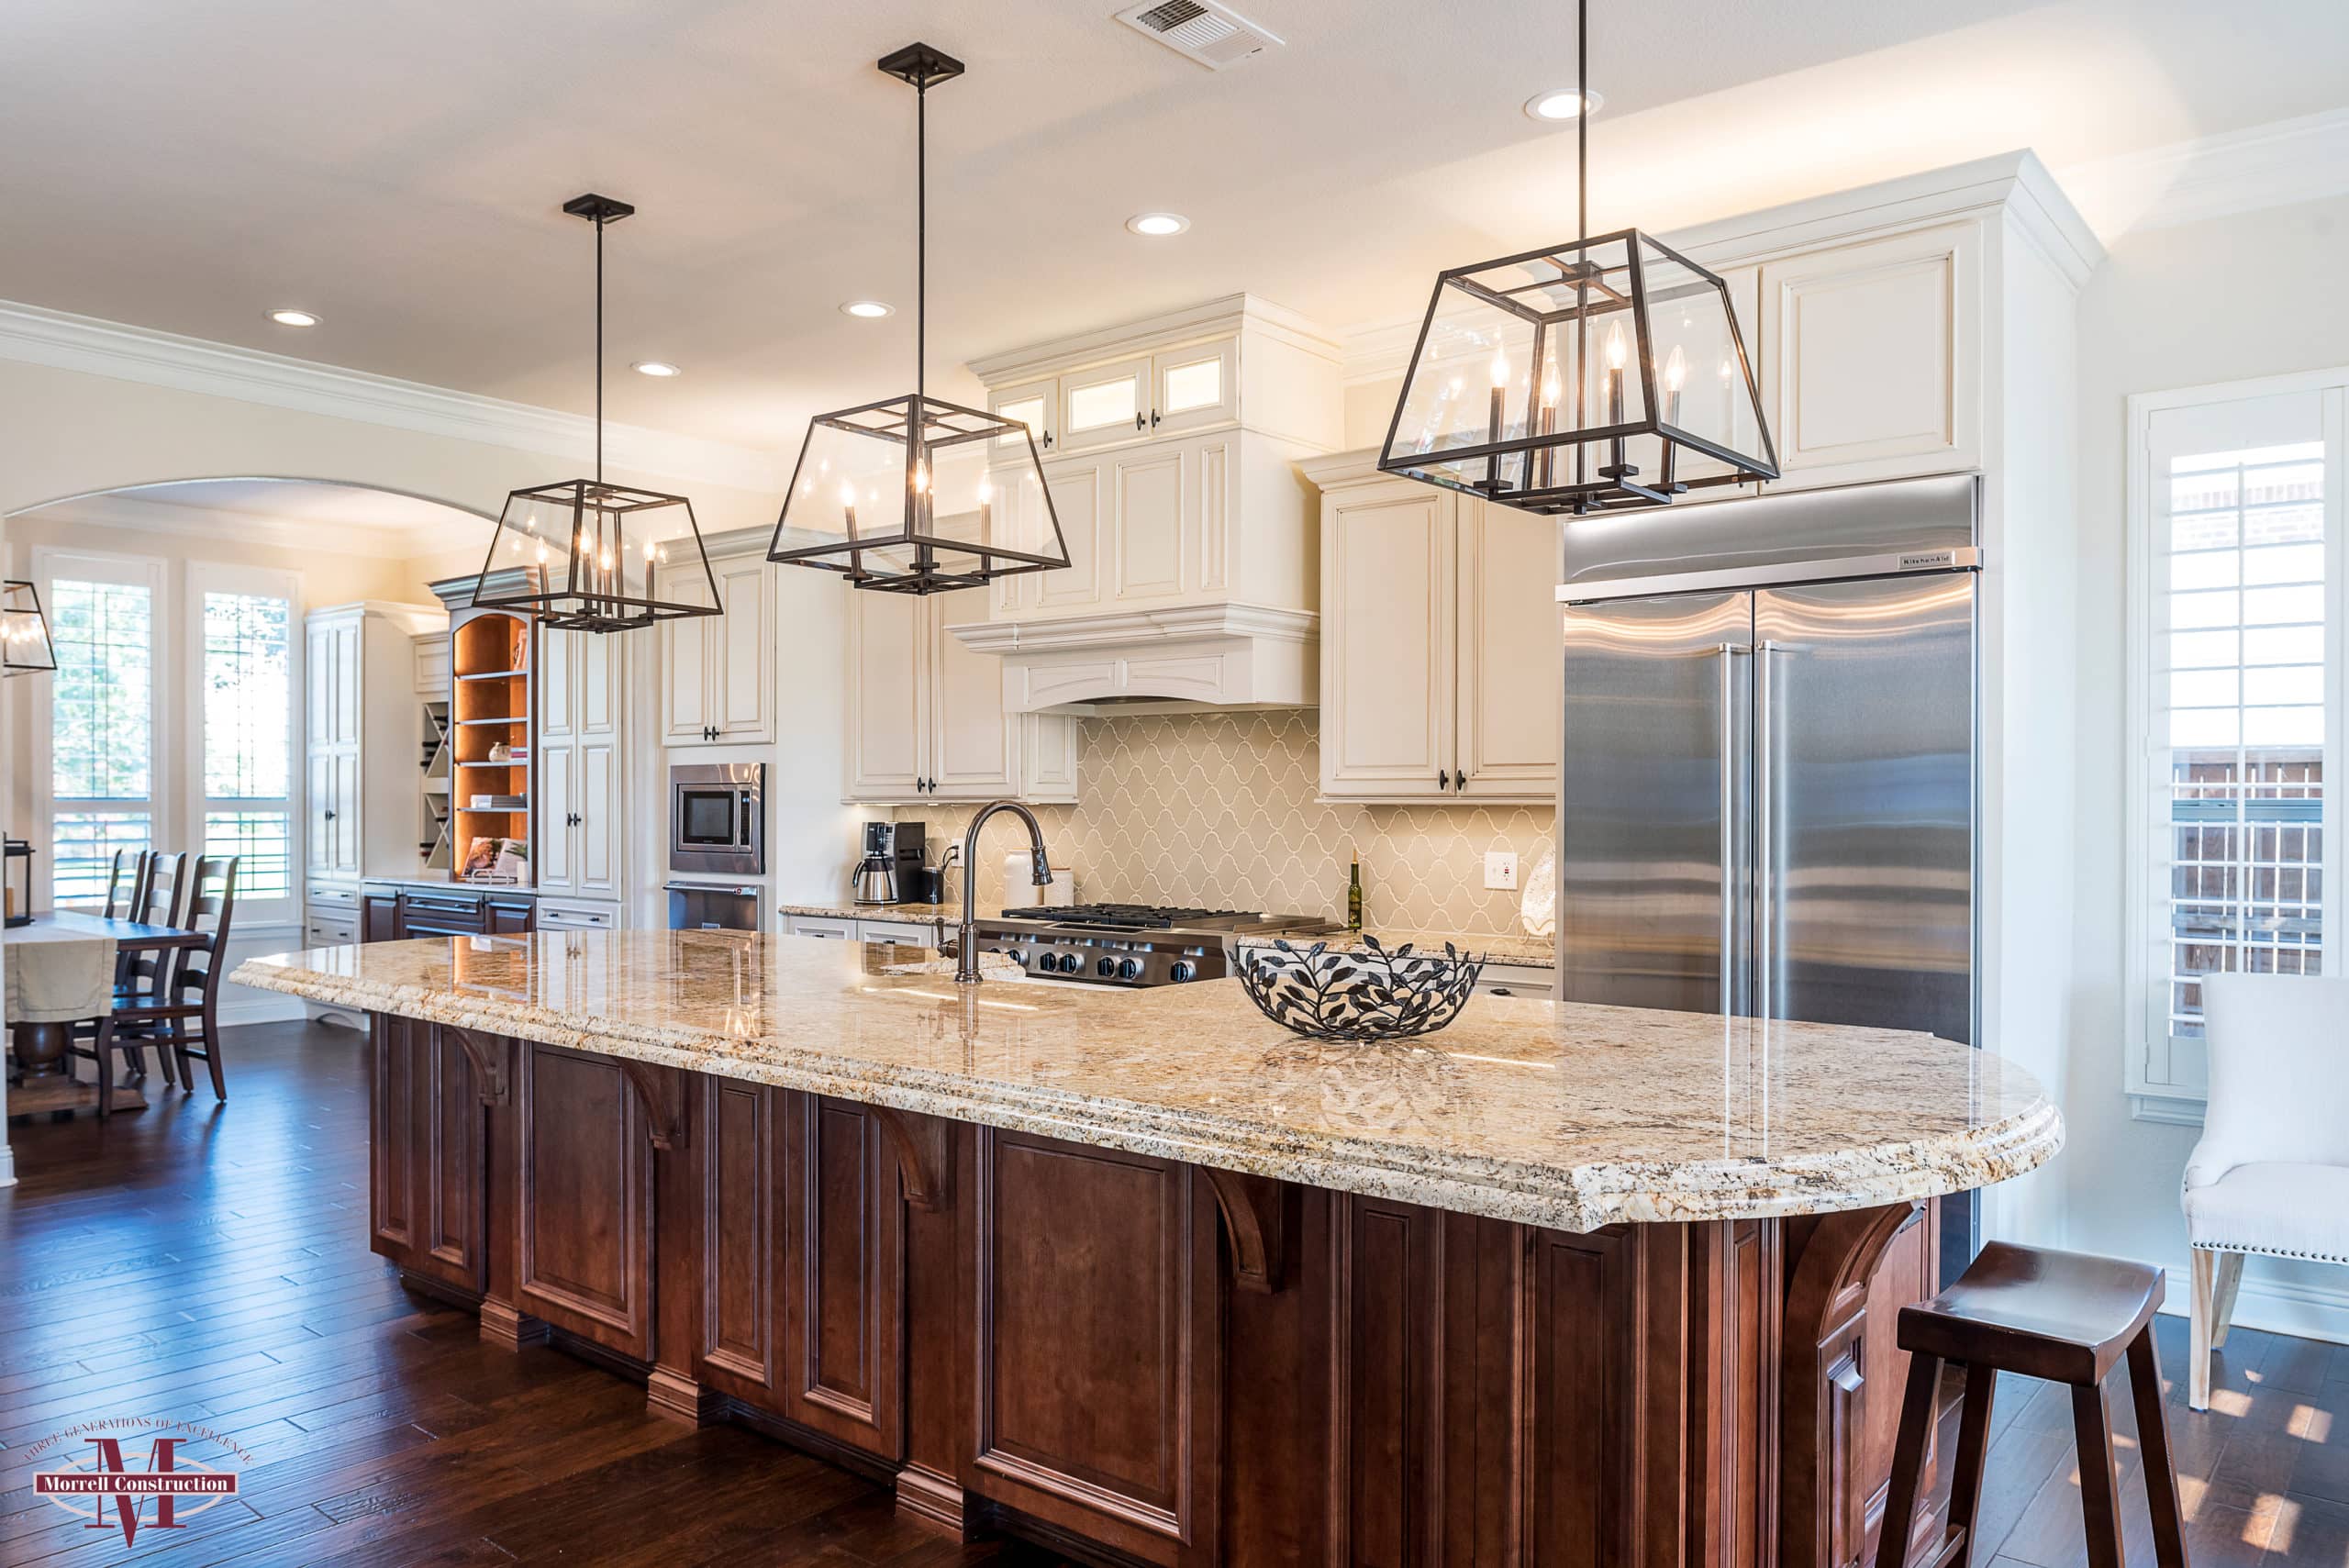 morrell construction kitchen and bath remodeling company